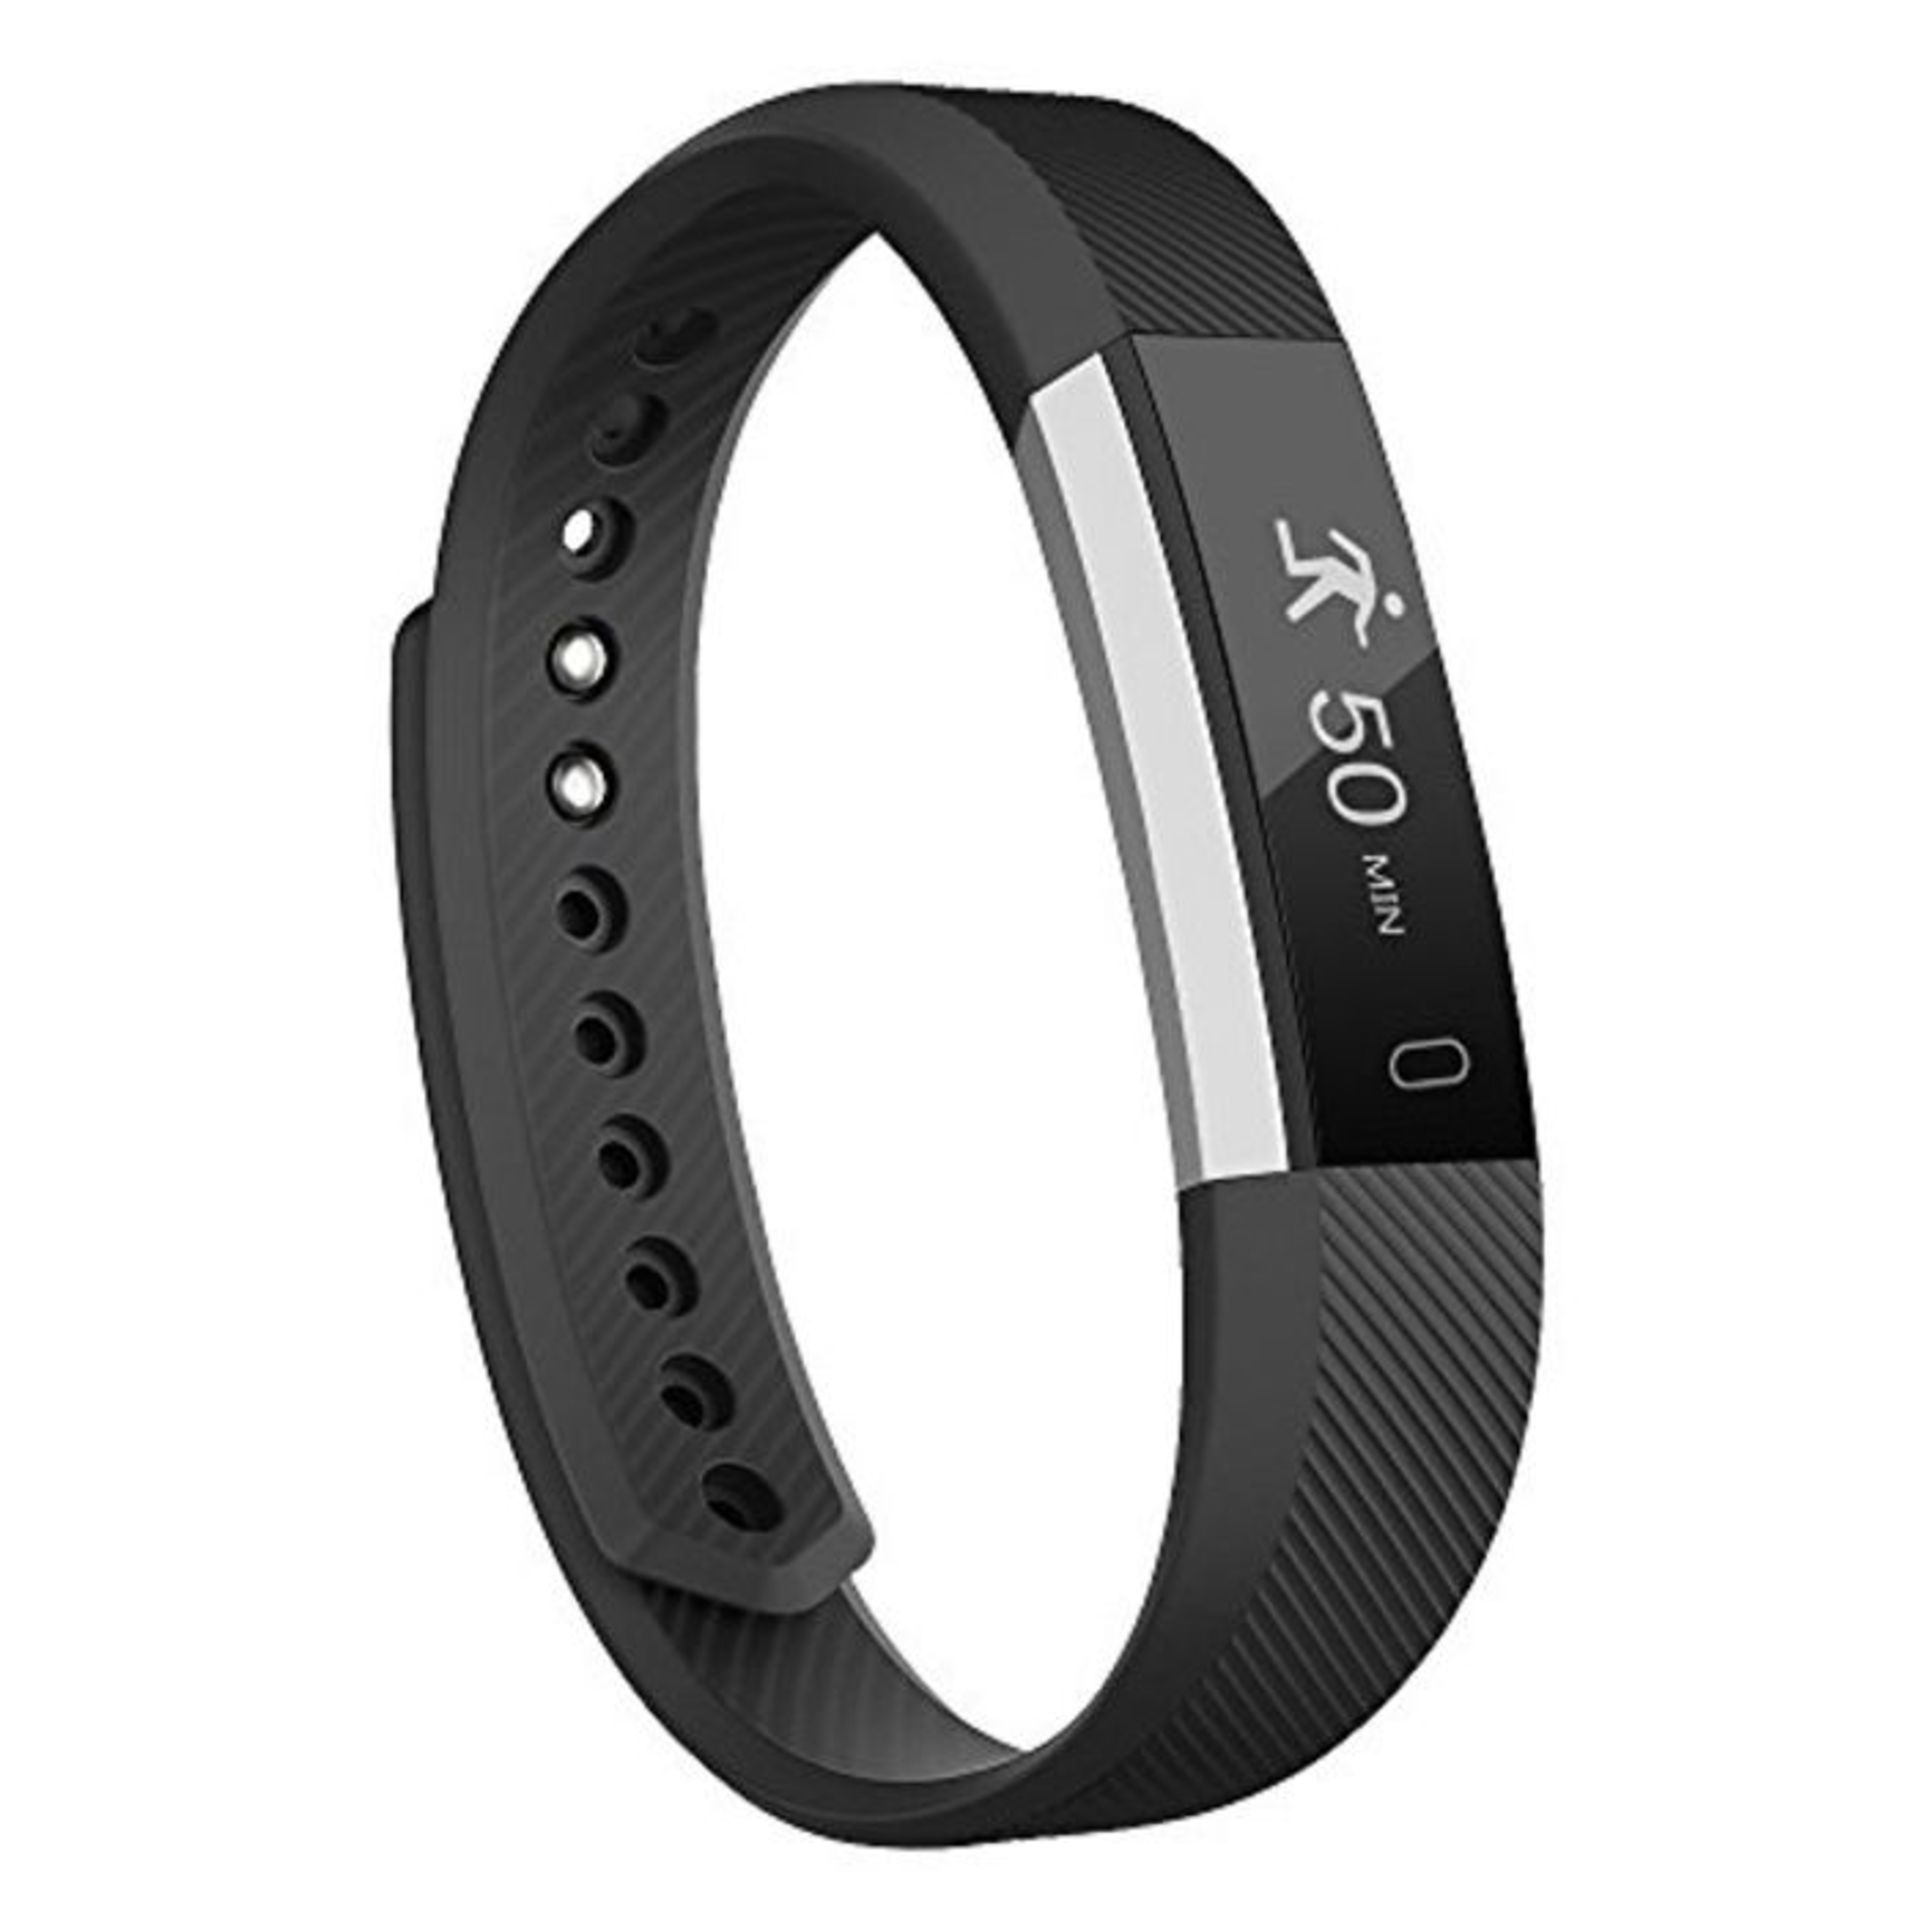 moreFit Slim Fitness Tracker with Touch Screen Best Fitness Wrist Band Pedometer Smart